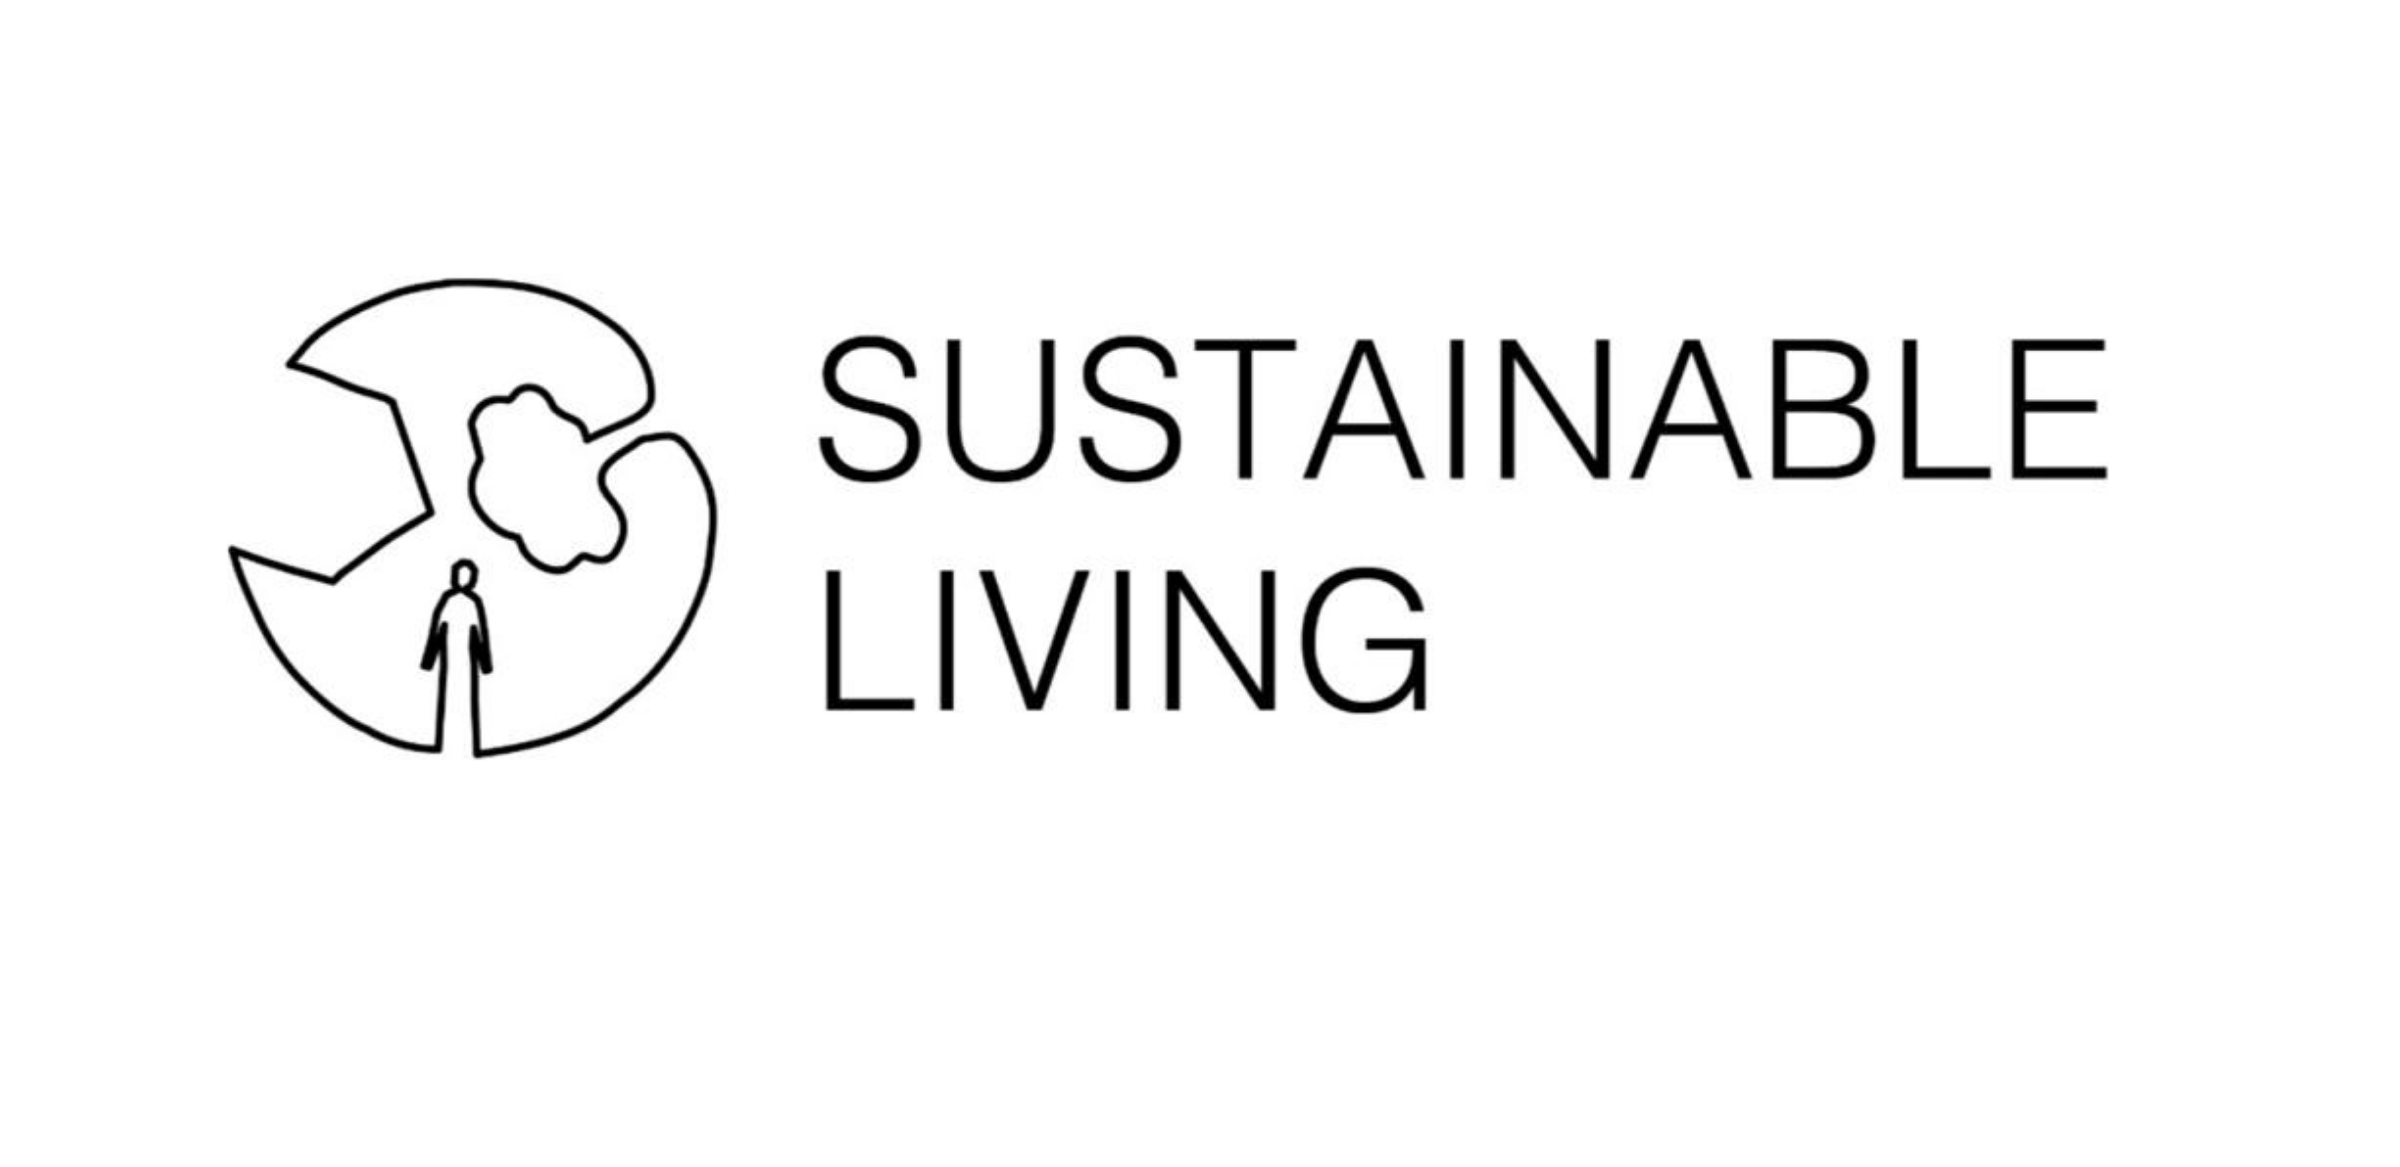 Sustainable living